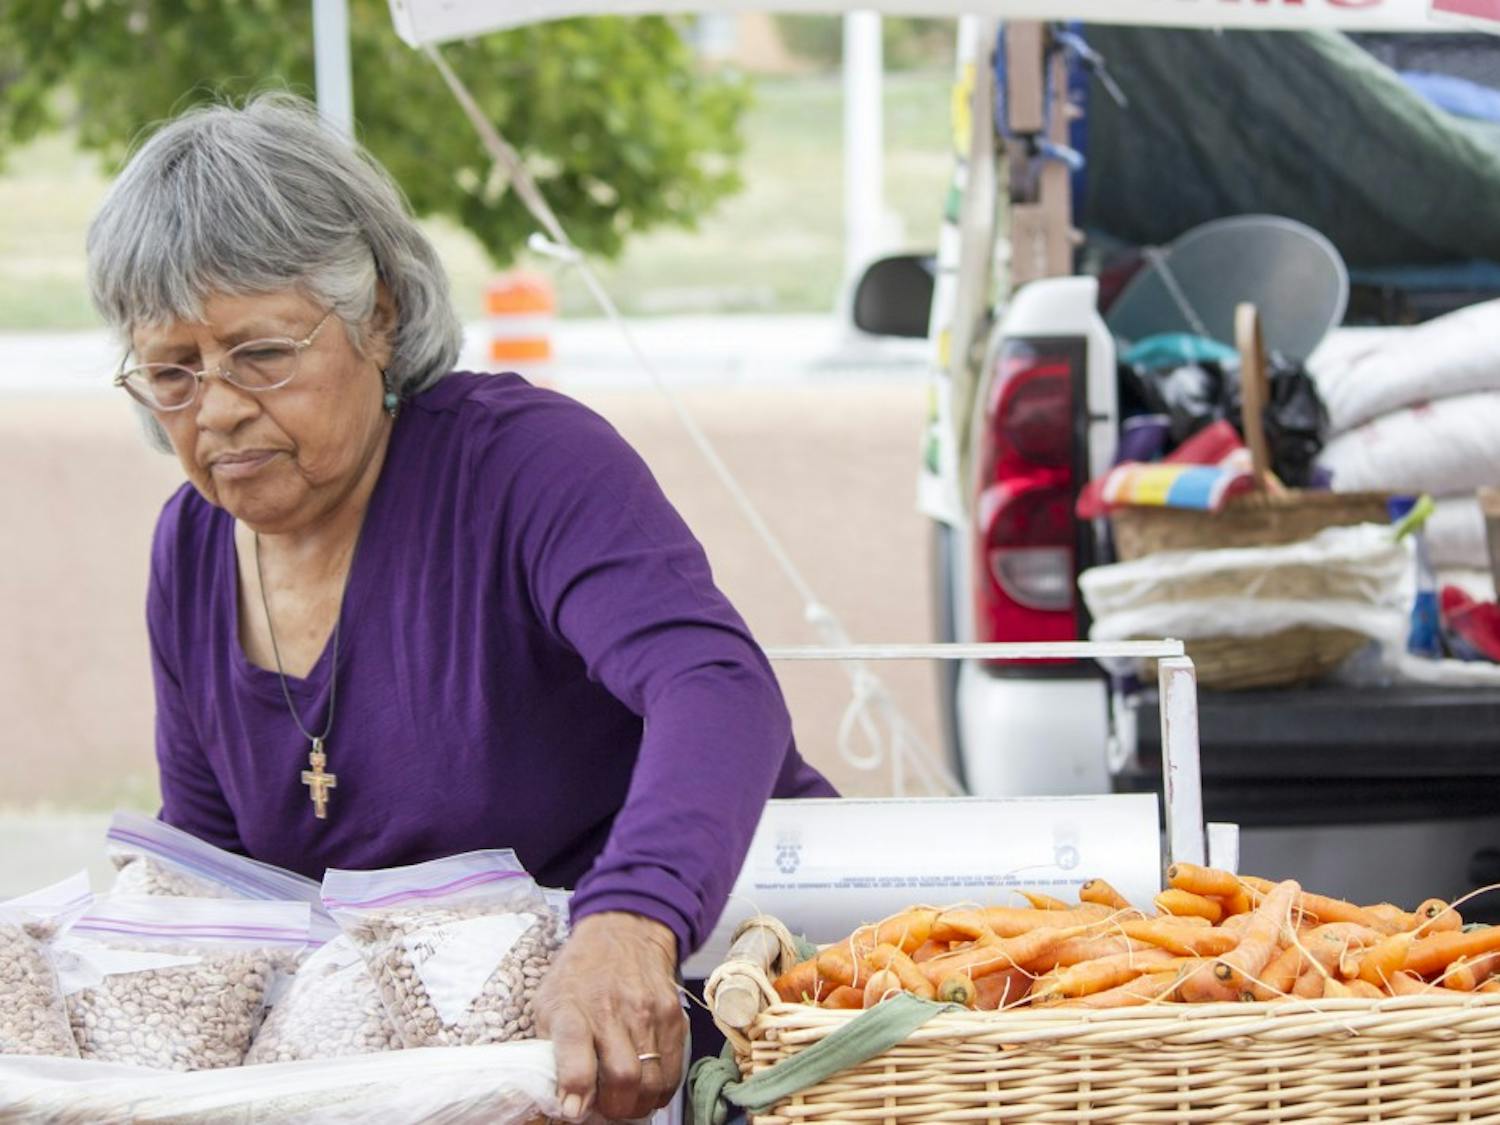 	Mary Macias, a local farmer, sets up her produce early Tuesday morning at the Albuquerque Uptown Grower’s Market, located at Presbyterian Hospital. Macias and other vendors are part of an initiative to foster positive economic relationships between local buyers and farmers by accepting various modes of payments such as WIC, Senior Checks, EBT and Debit.  